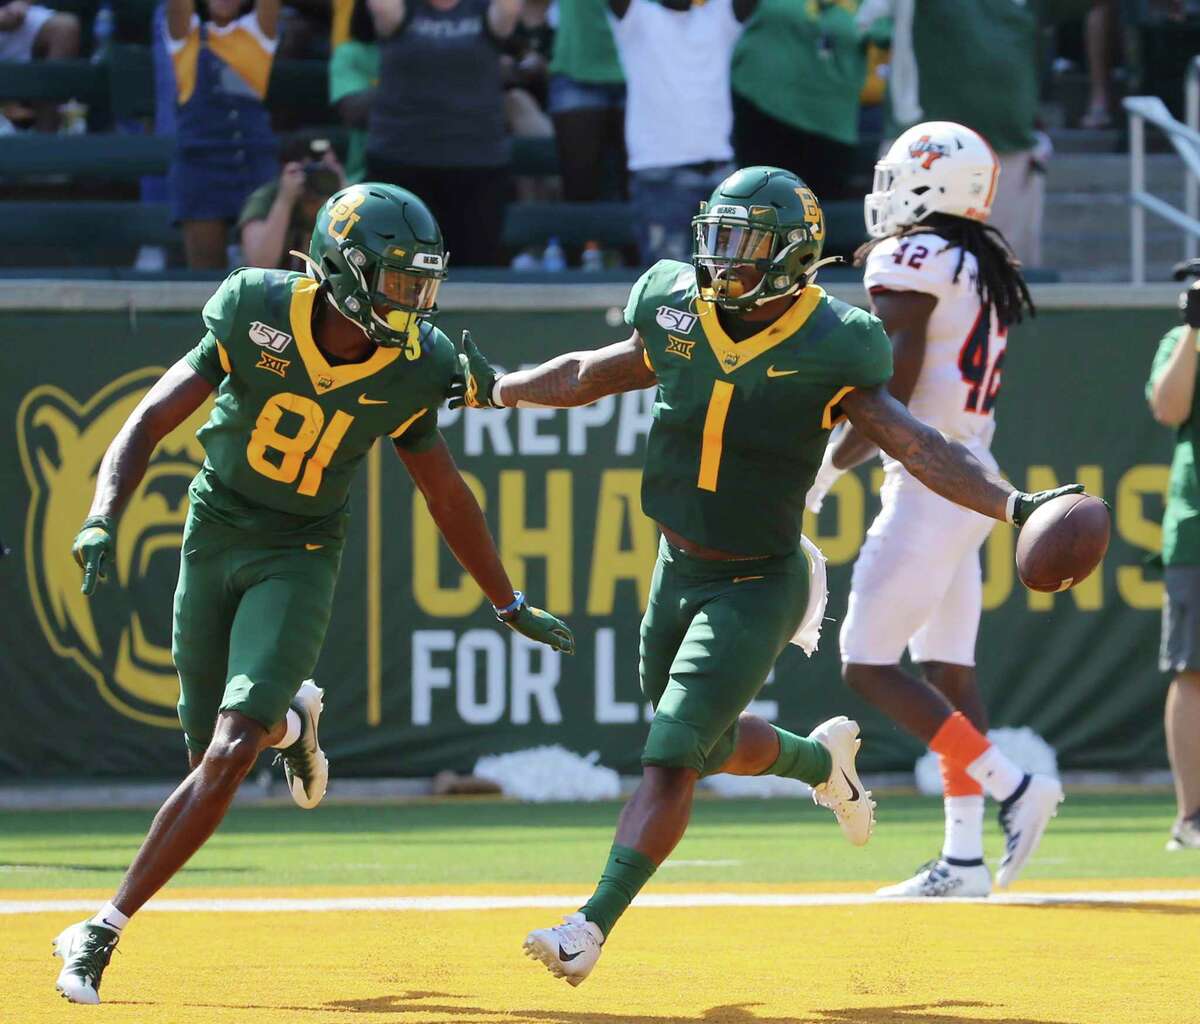 Baylor cornerback Grayland Arnold, right, celebrate with wide receiver Tyquan Thornton, after his punt return touchdown against UTSA in the first half of an NCAA college football game, Saturday, Sept. 7, 2019, in Waco, Texas. (Rod Aydelotte/Waco Tribune-Herald via AP)